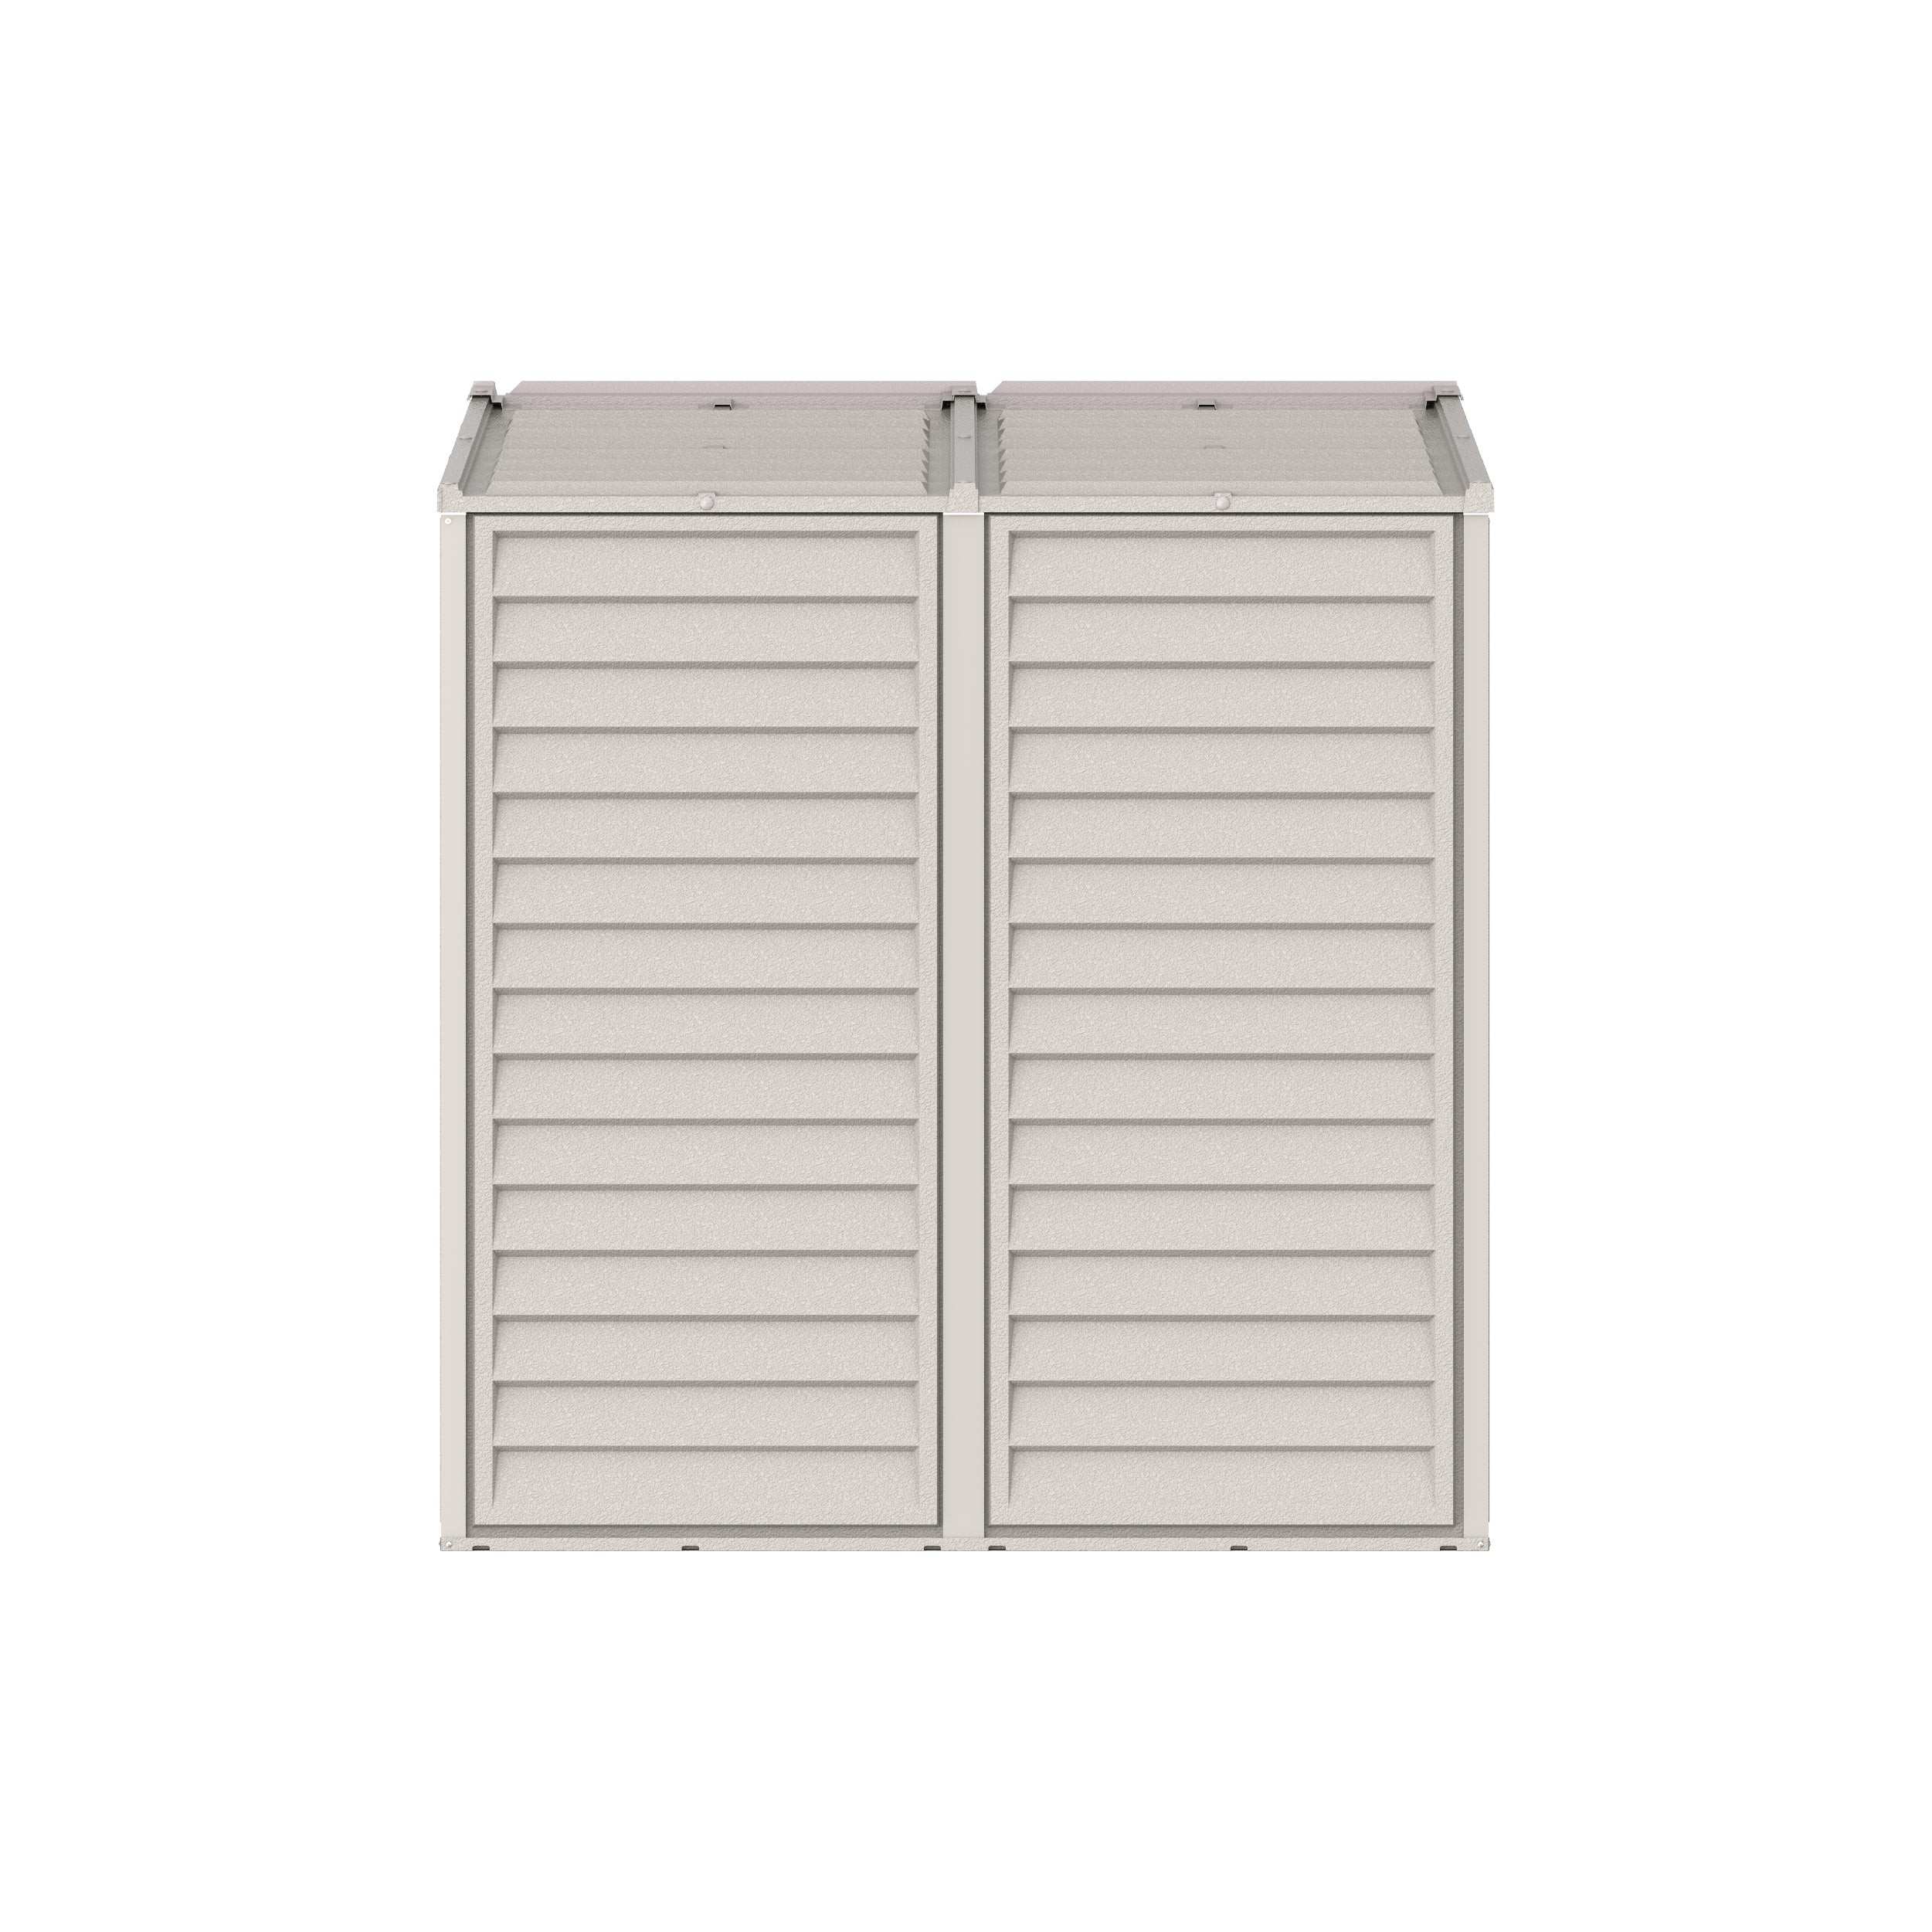 DuraMate 8x5.5ft Resin Storage Shed with FREE Shelving Rack 4